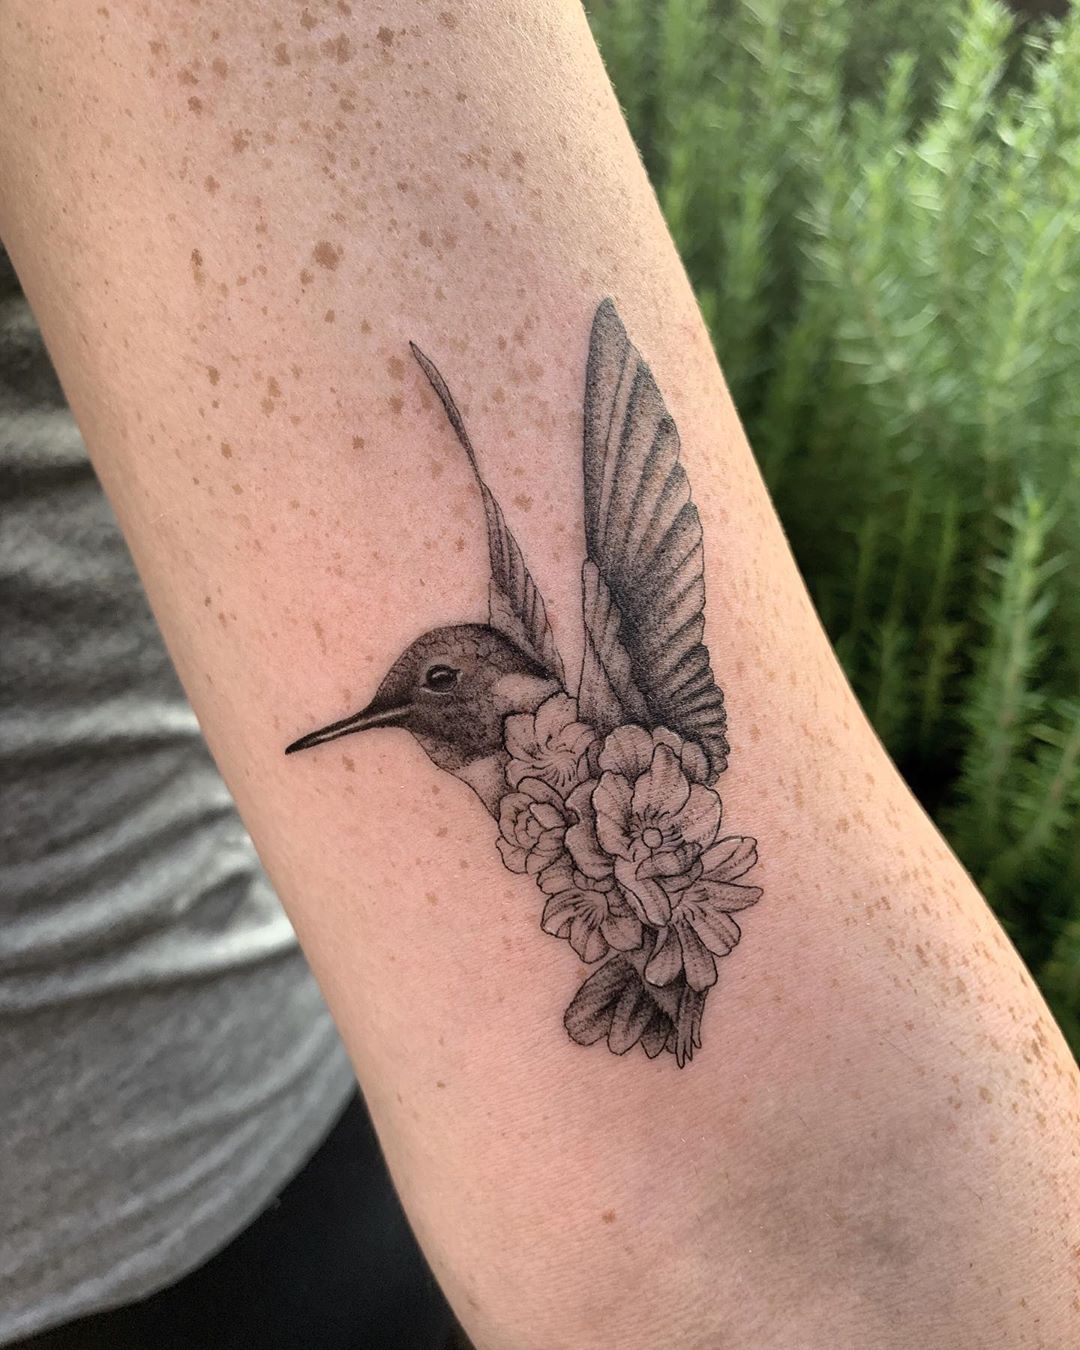 Hummingbird Tattoos with a Body Made of Flowers